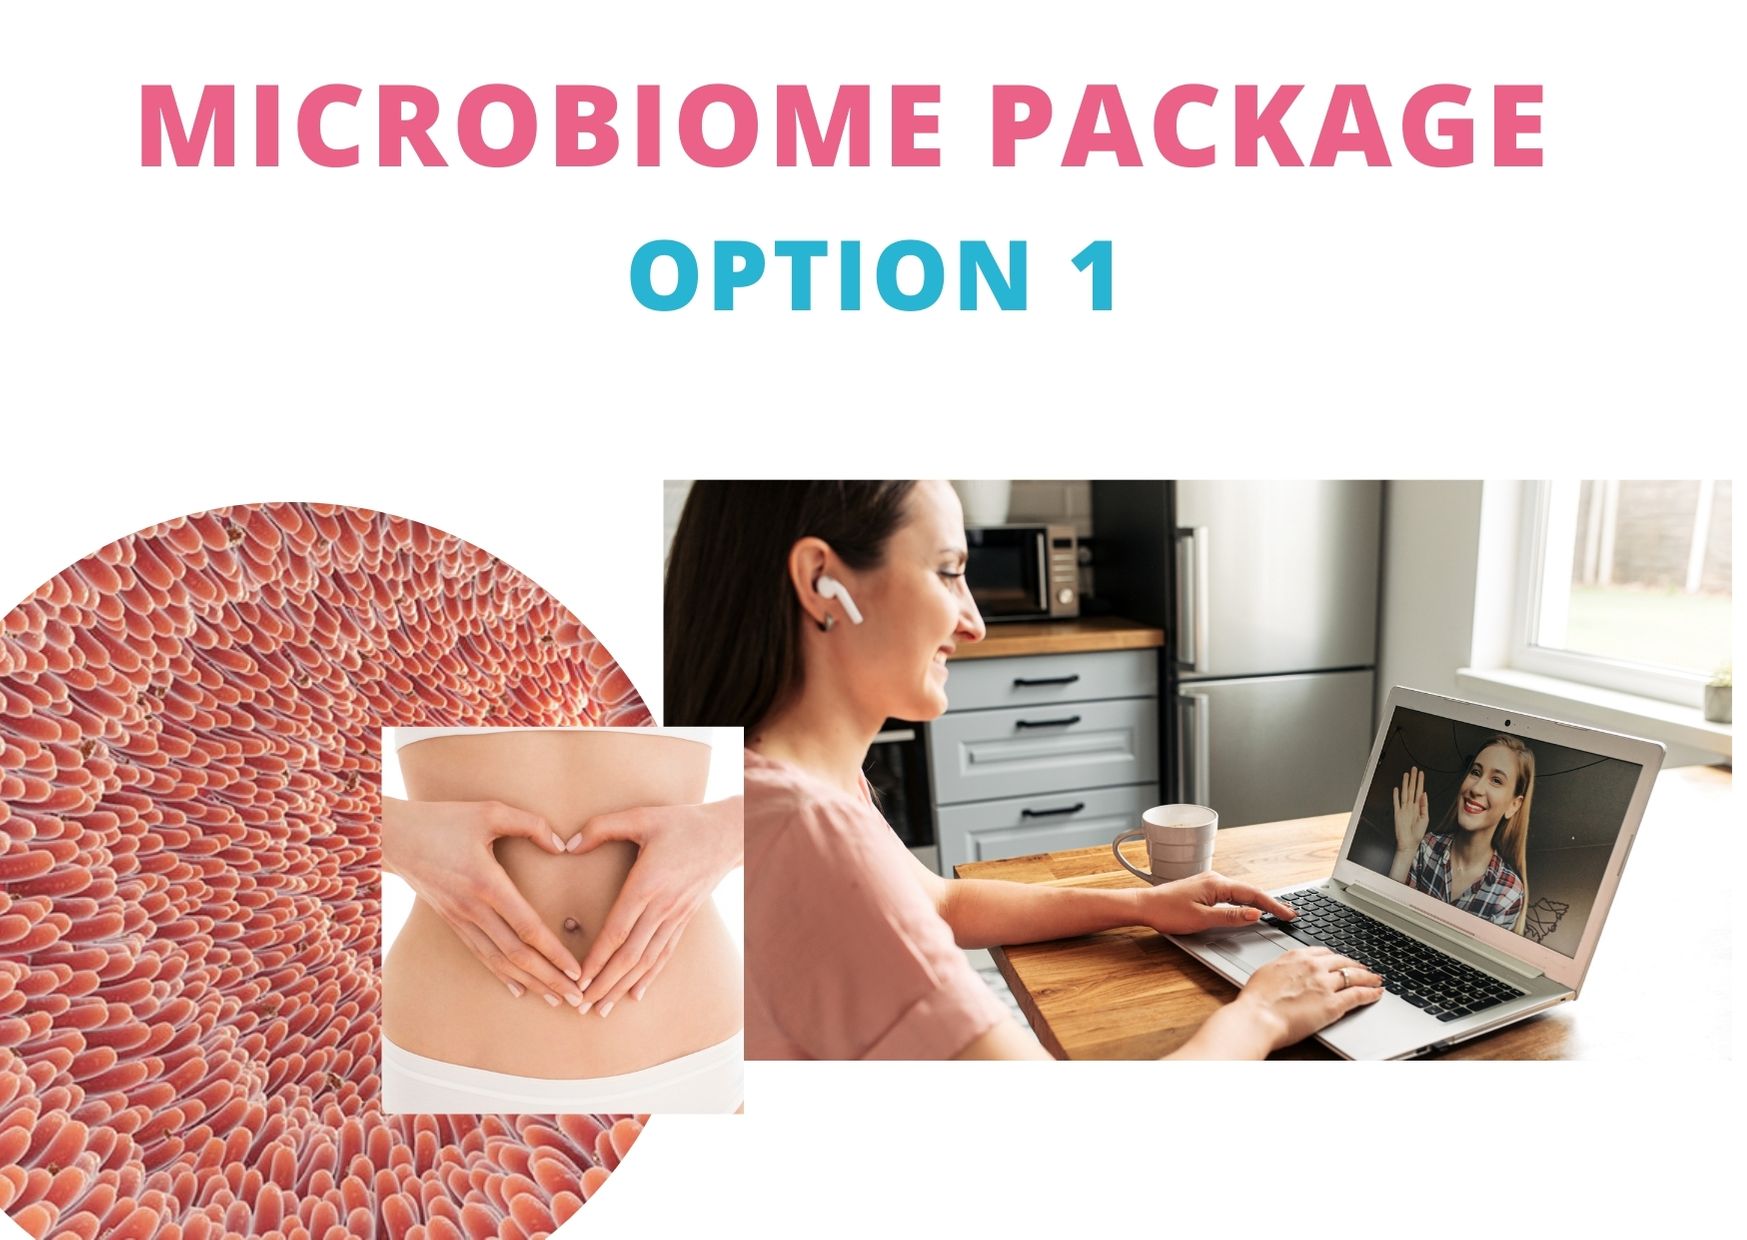 microbiome package option 01